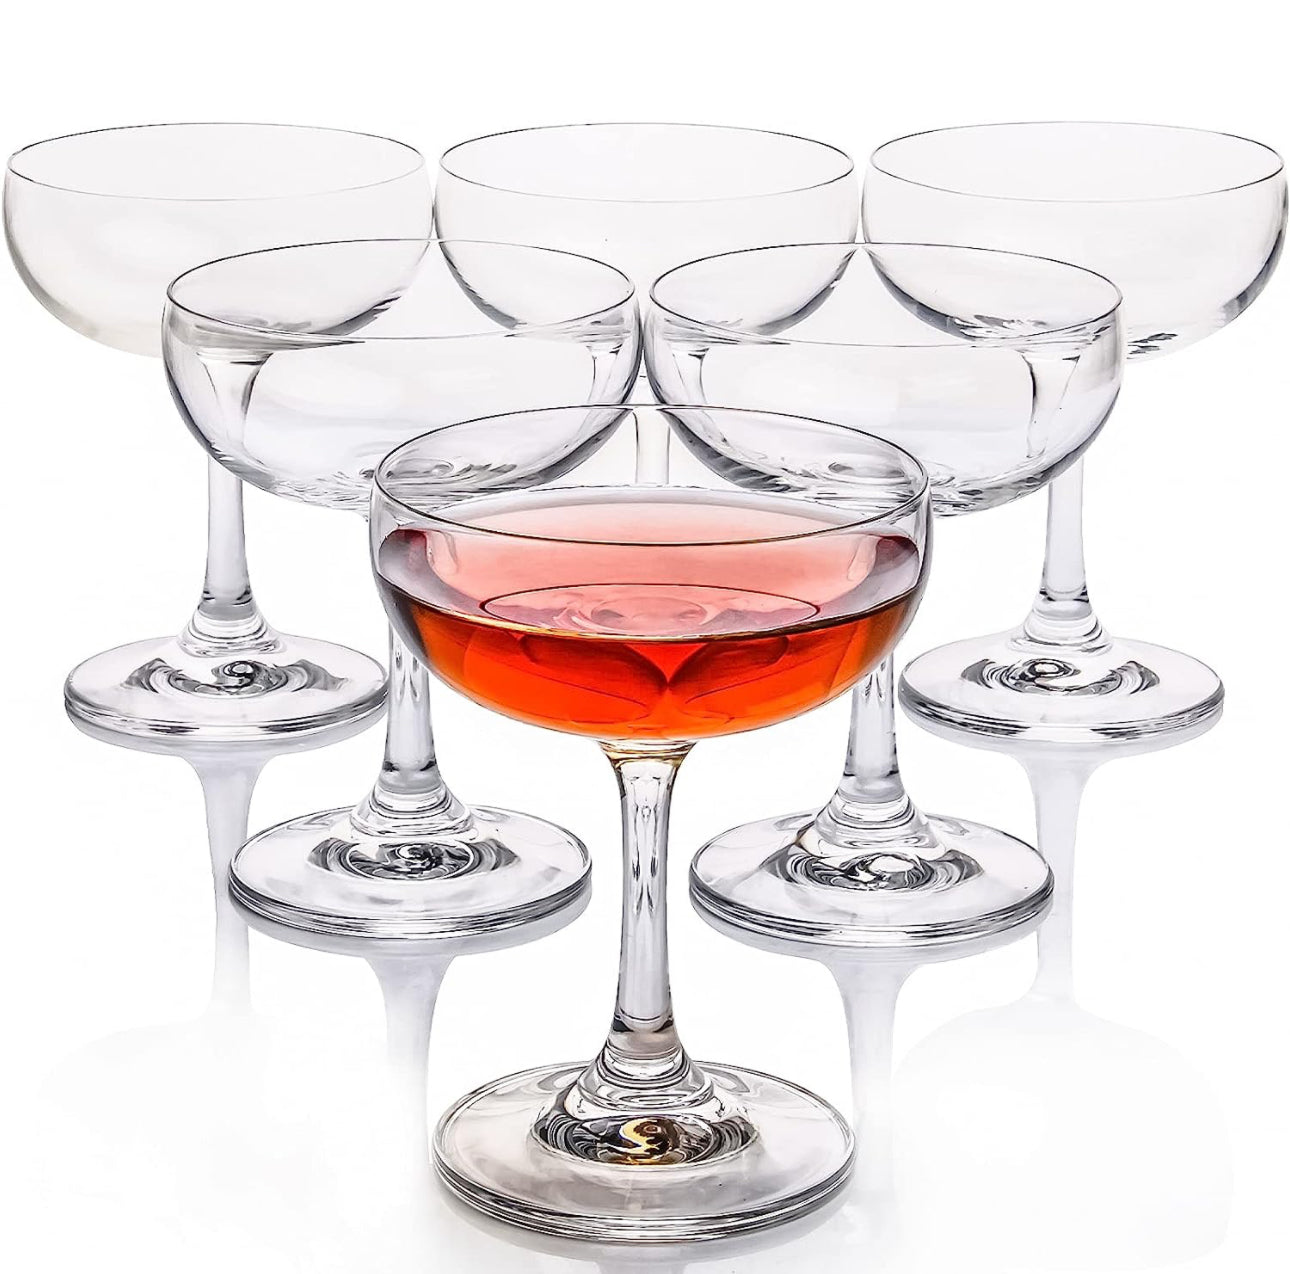 FAWLES Crystal Coupe Glasses, Set of 6, 7 Ounce(220ml)